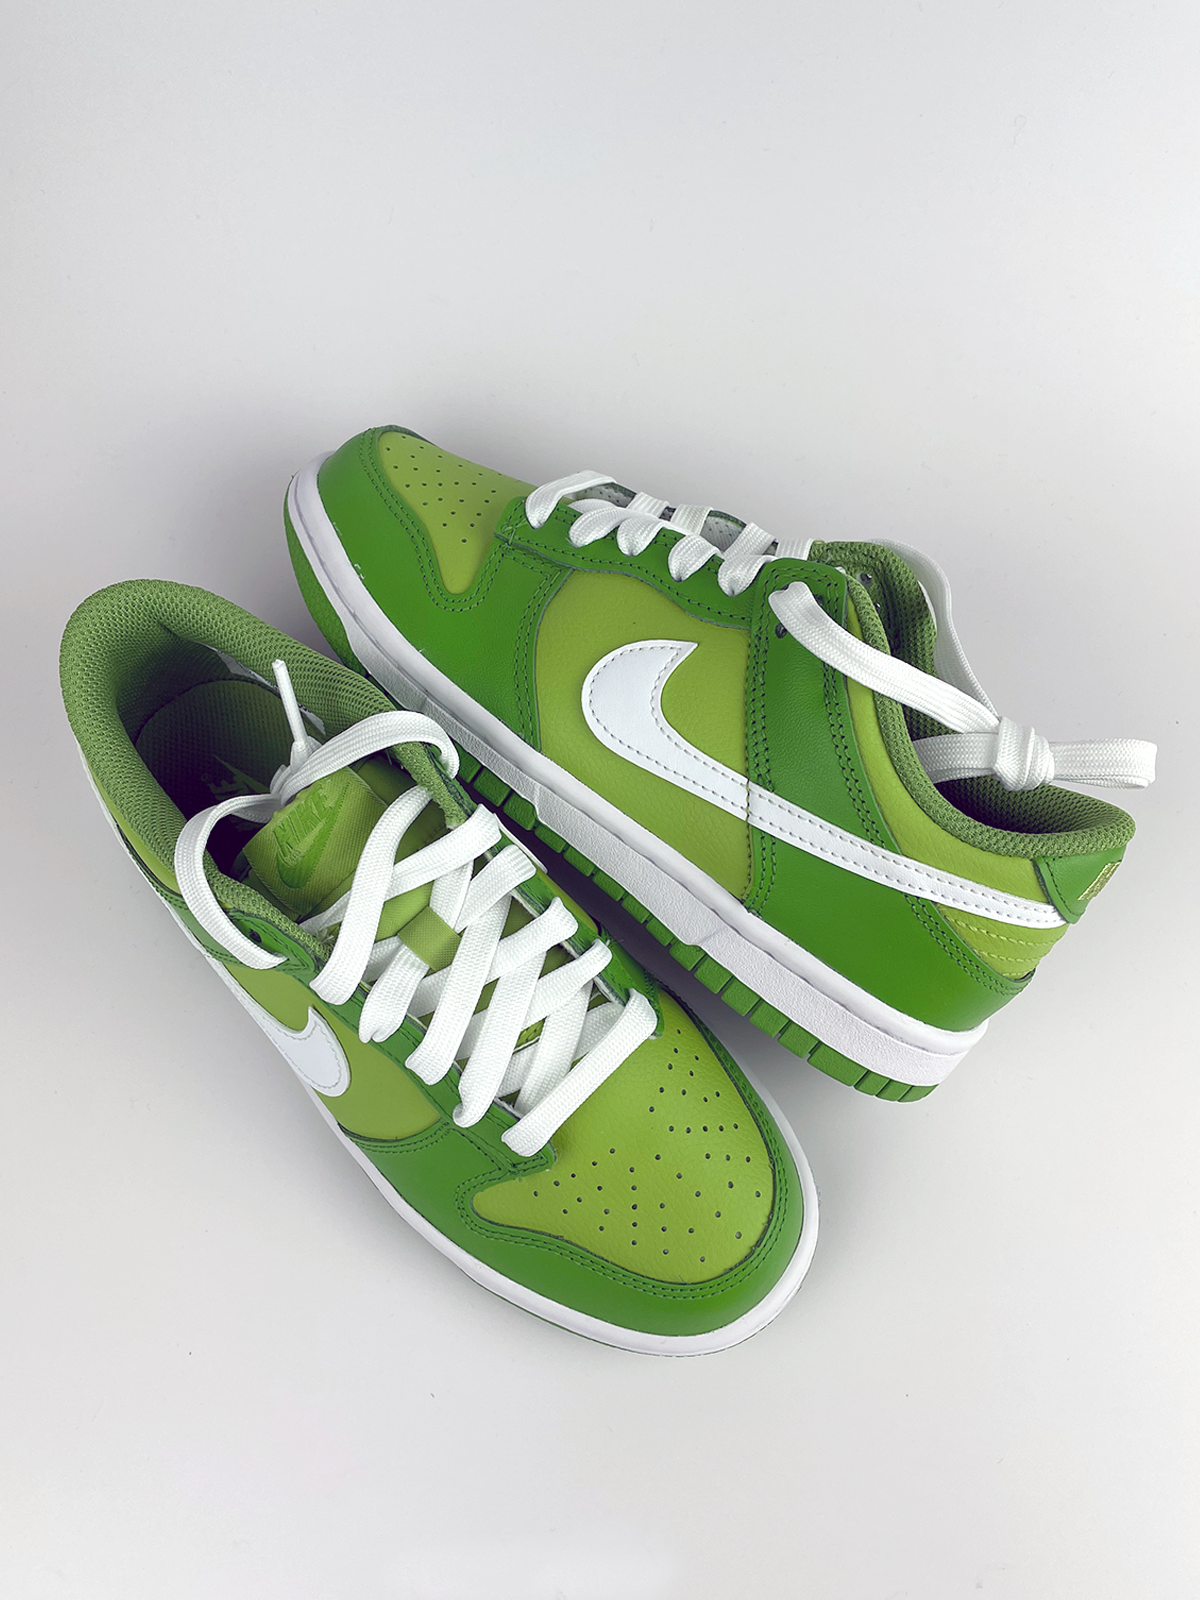 Nike SB Dunk Low Chlorophyll for Sale, Authenticity Guaranteed